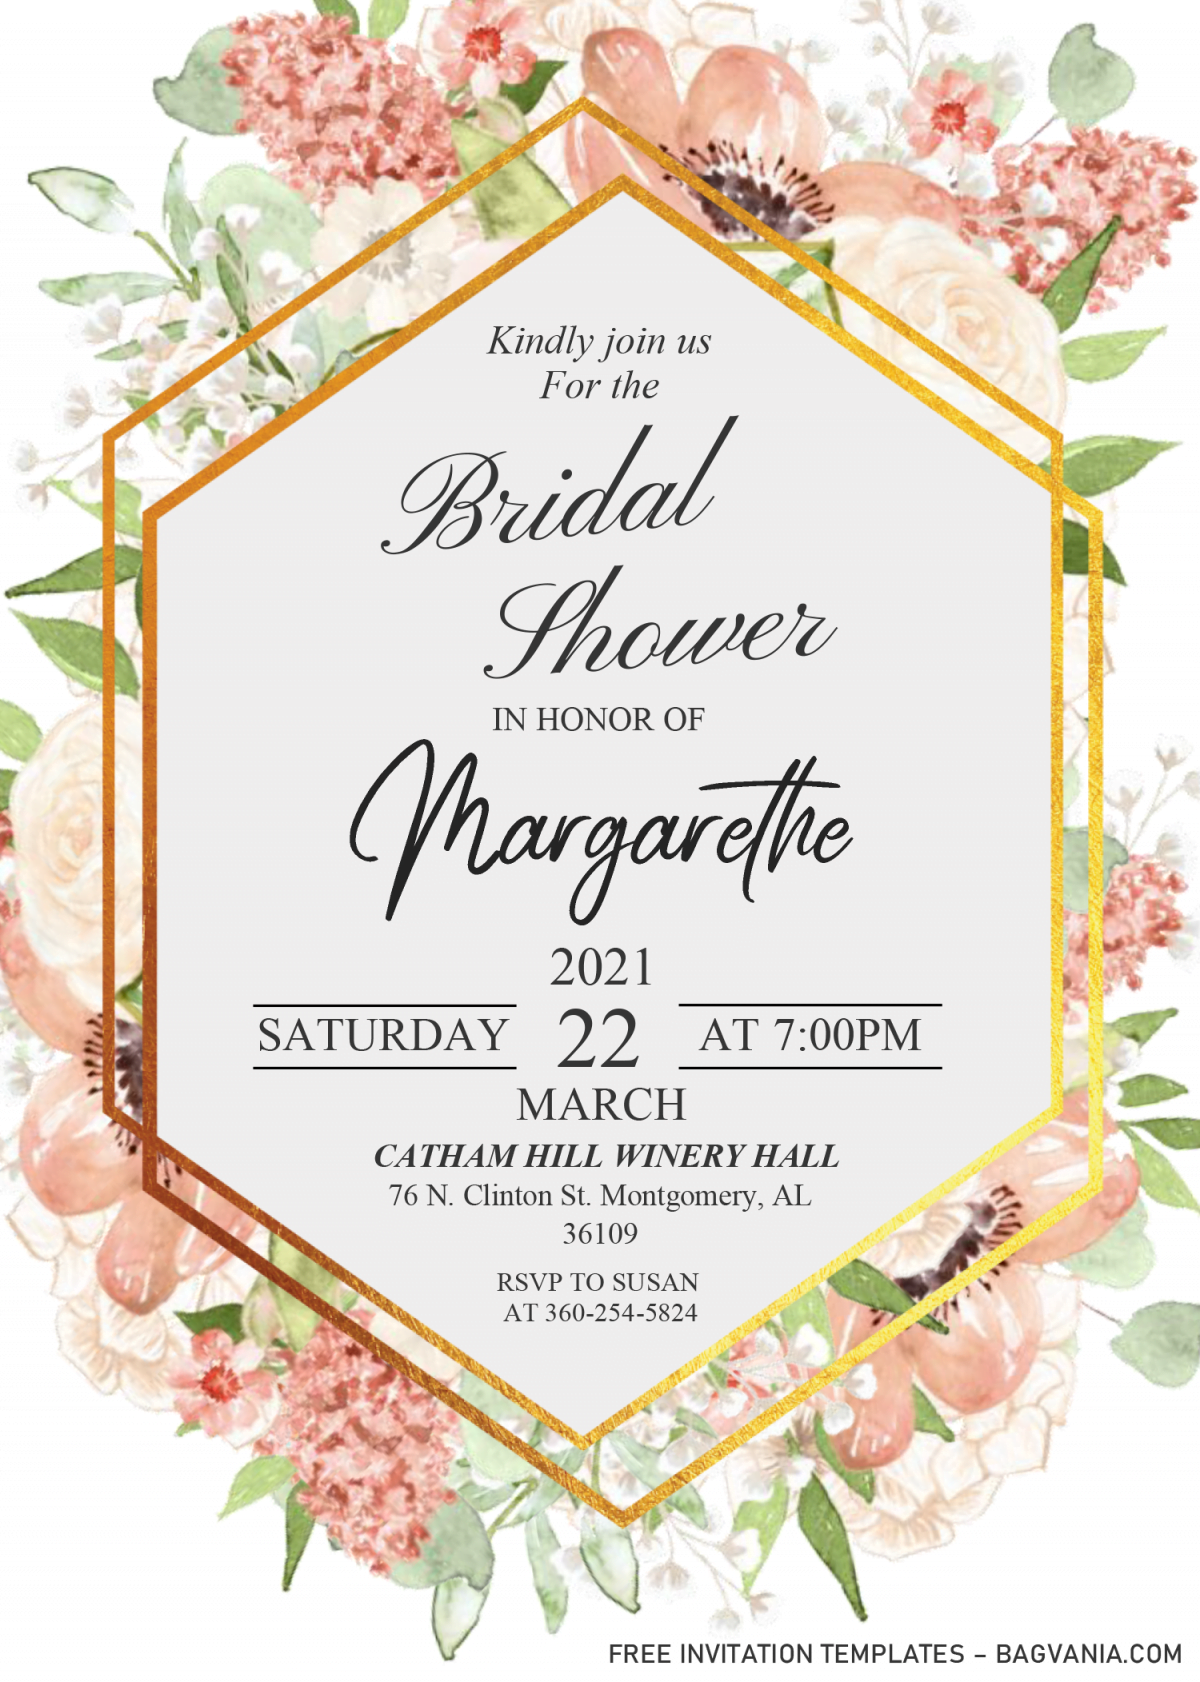 Modern Floral Invitation Templates - Editable .DOCX and has gold frame